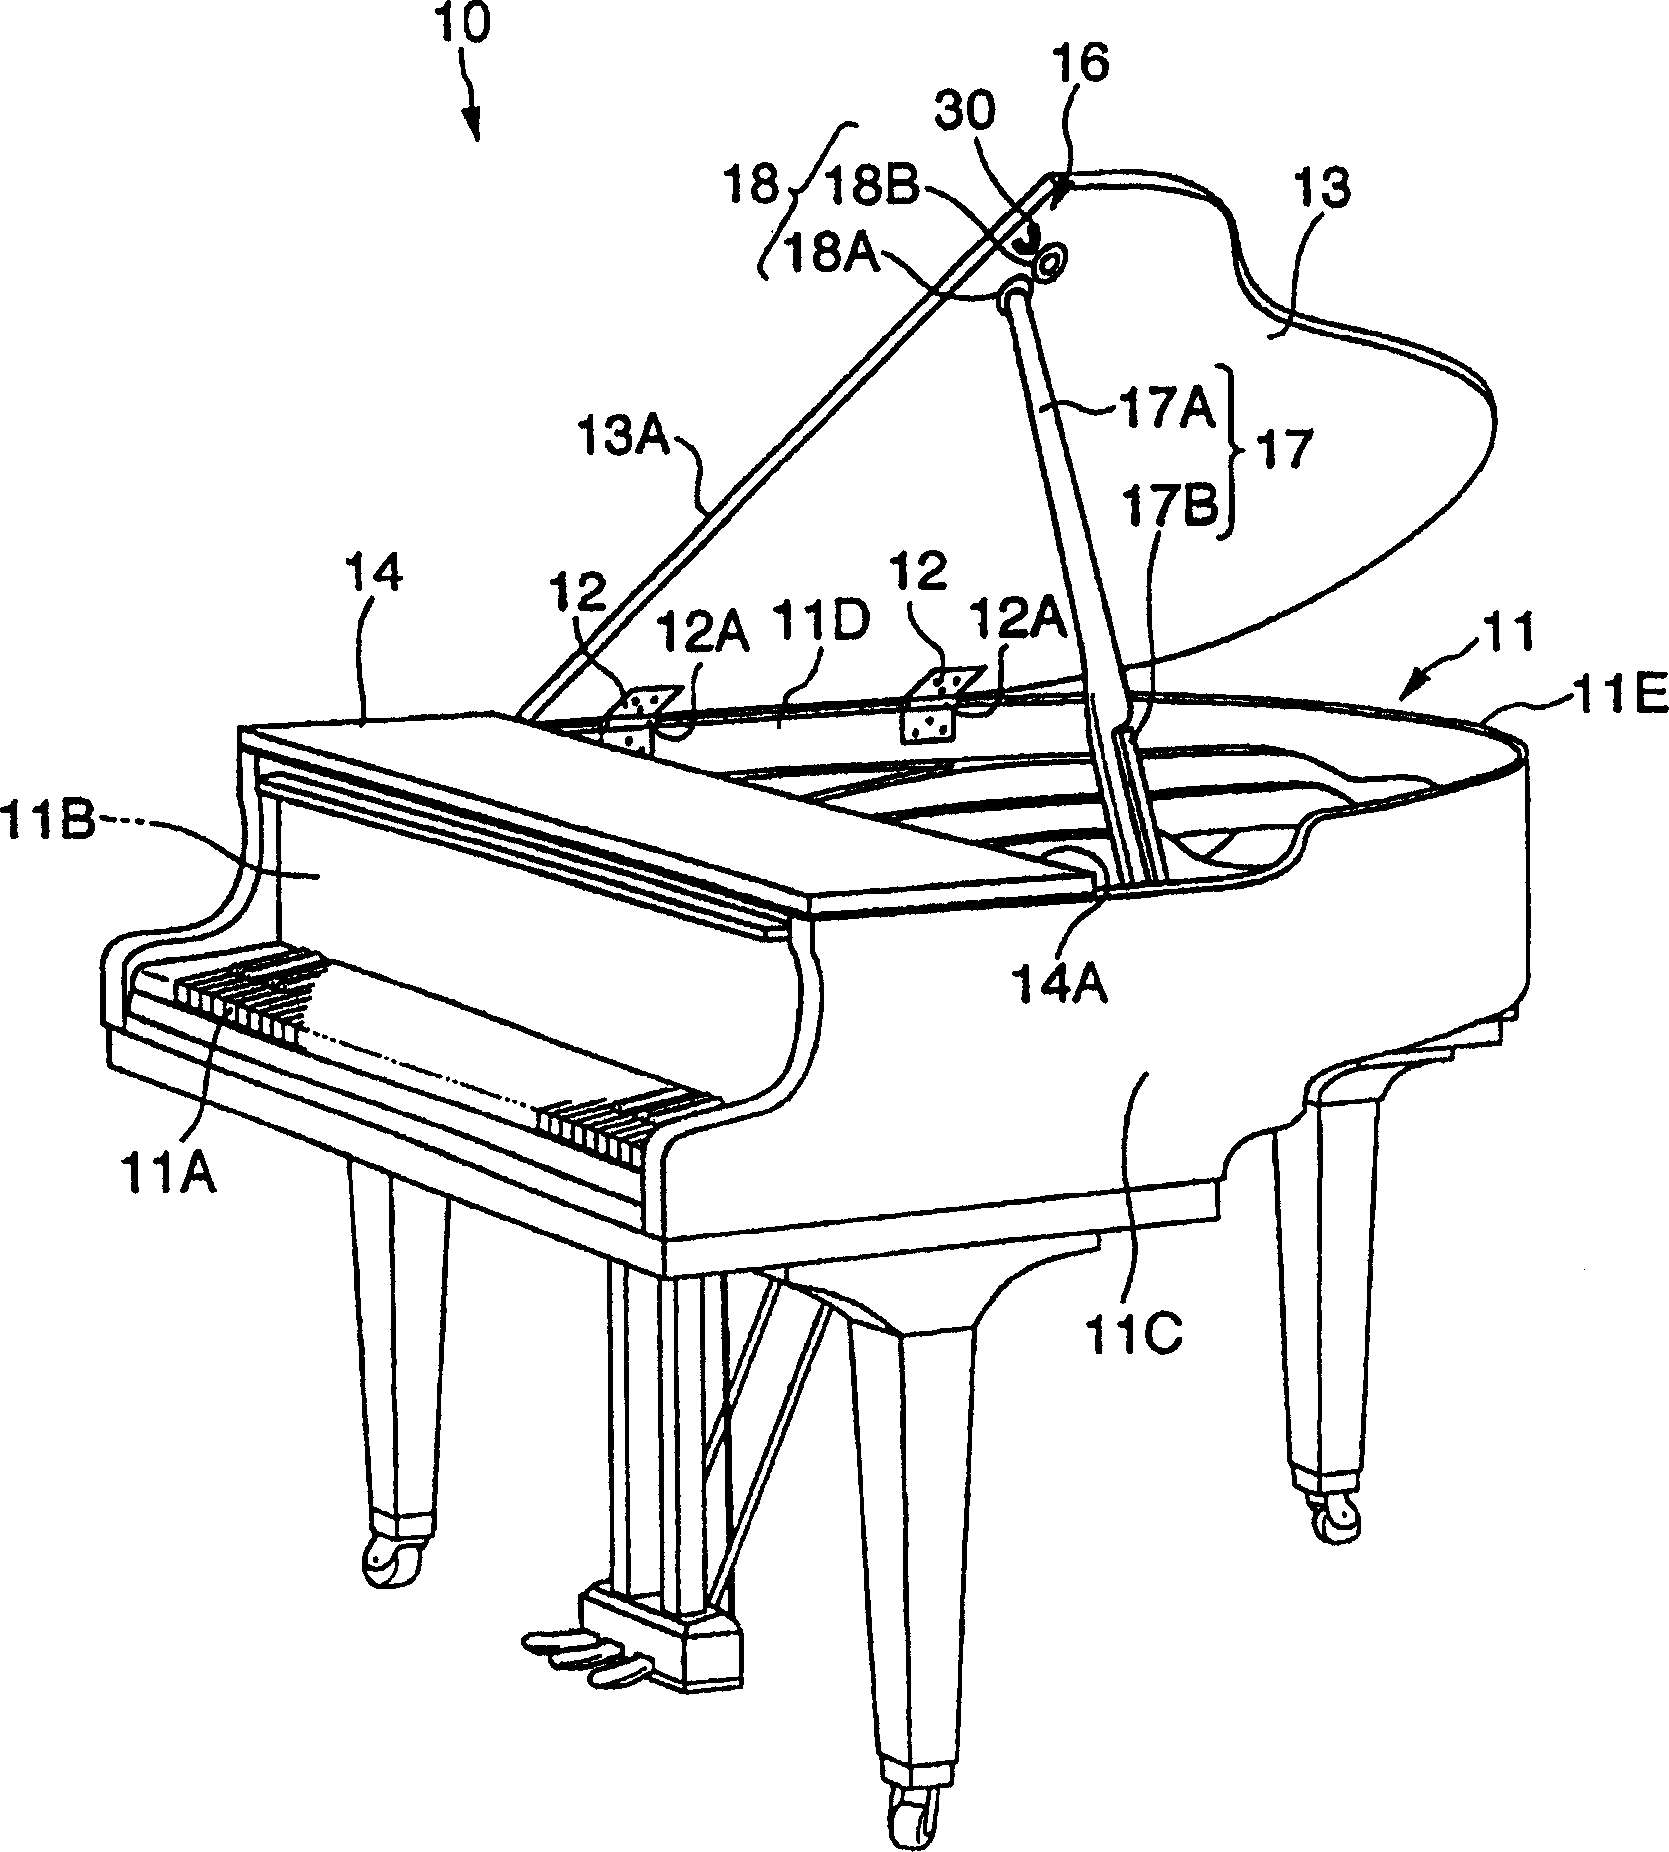 Top cover structure of keyboard musical instrument